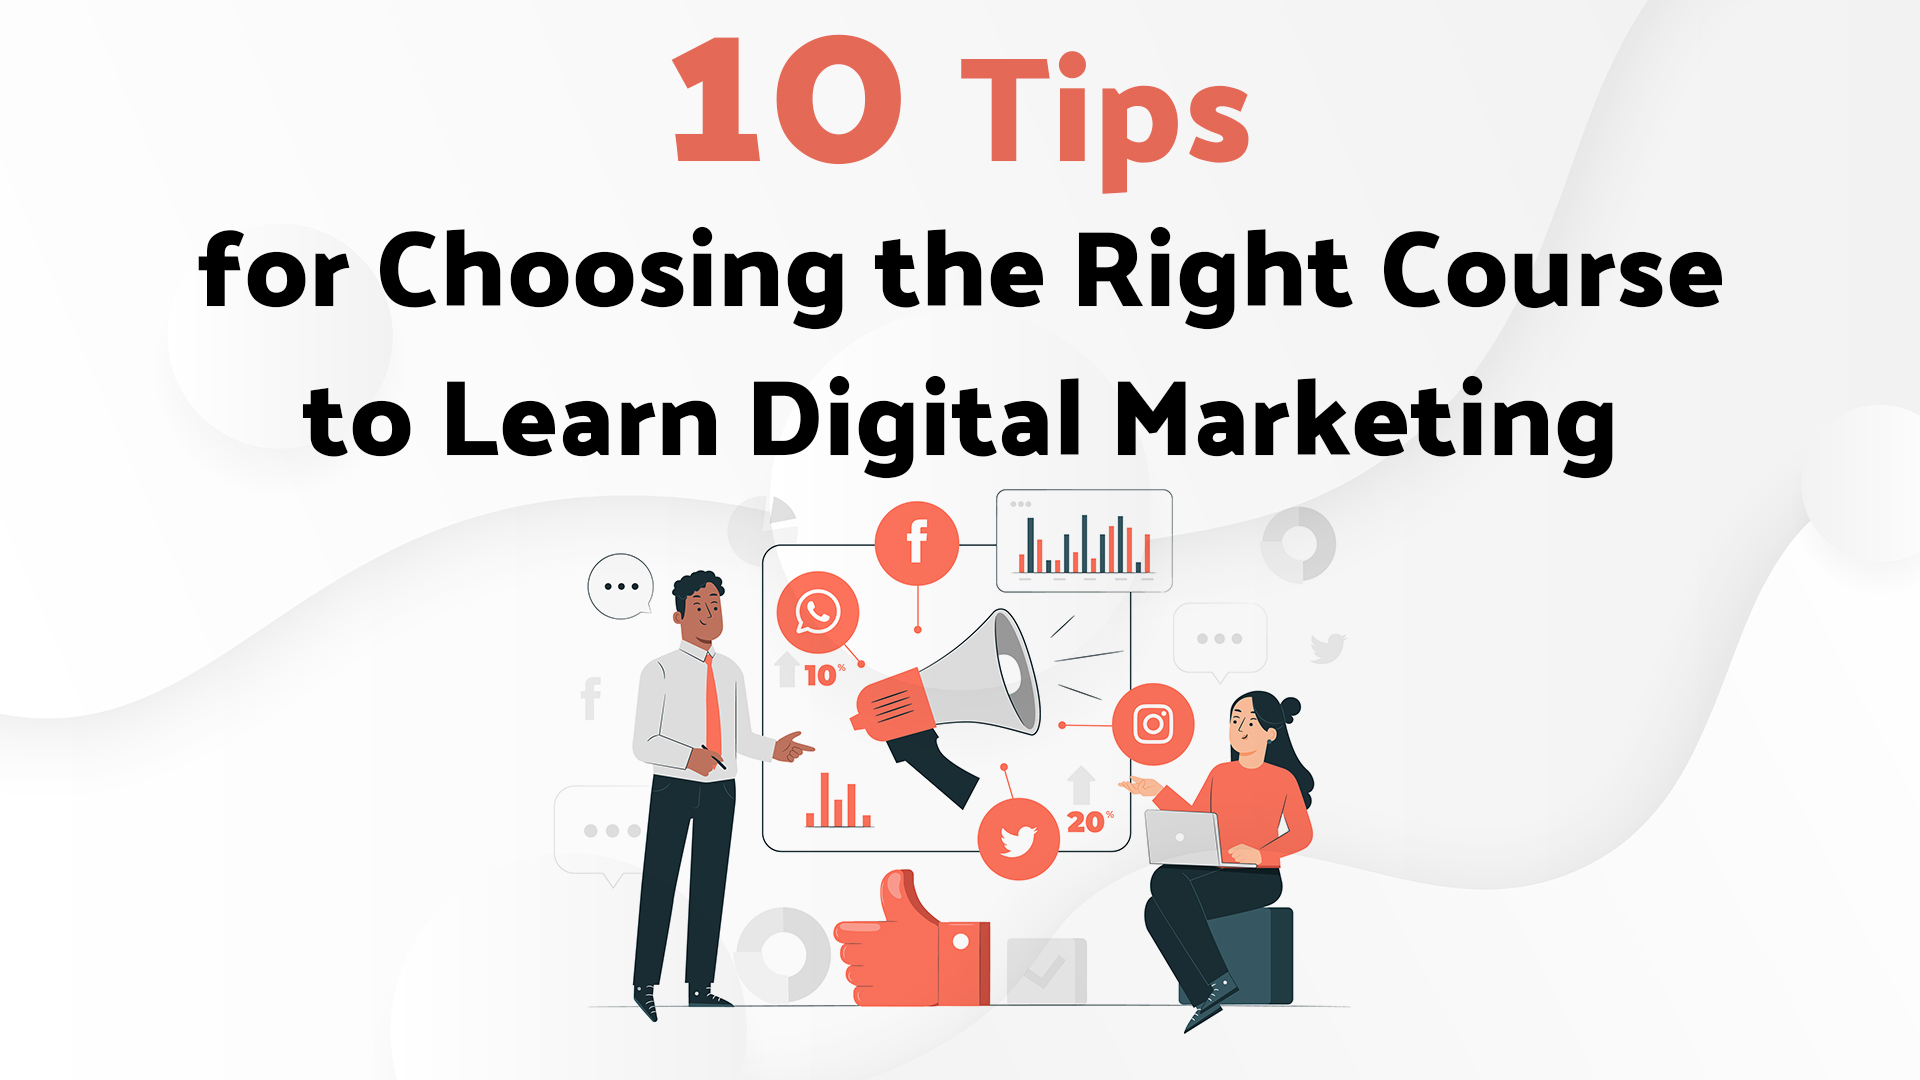 10 Tips for Choosing the Right Course to Learn Digital Marketing